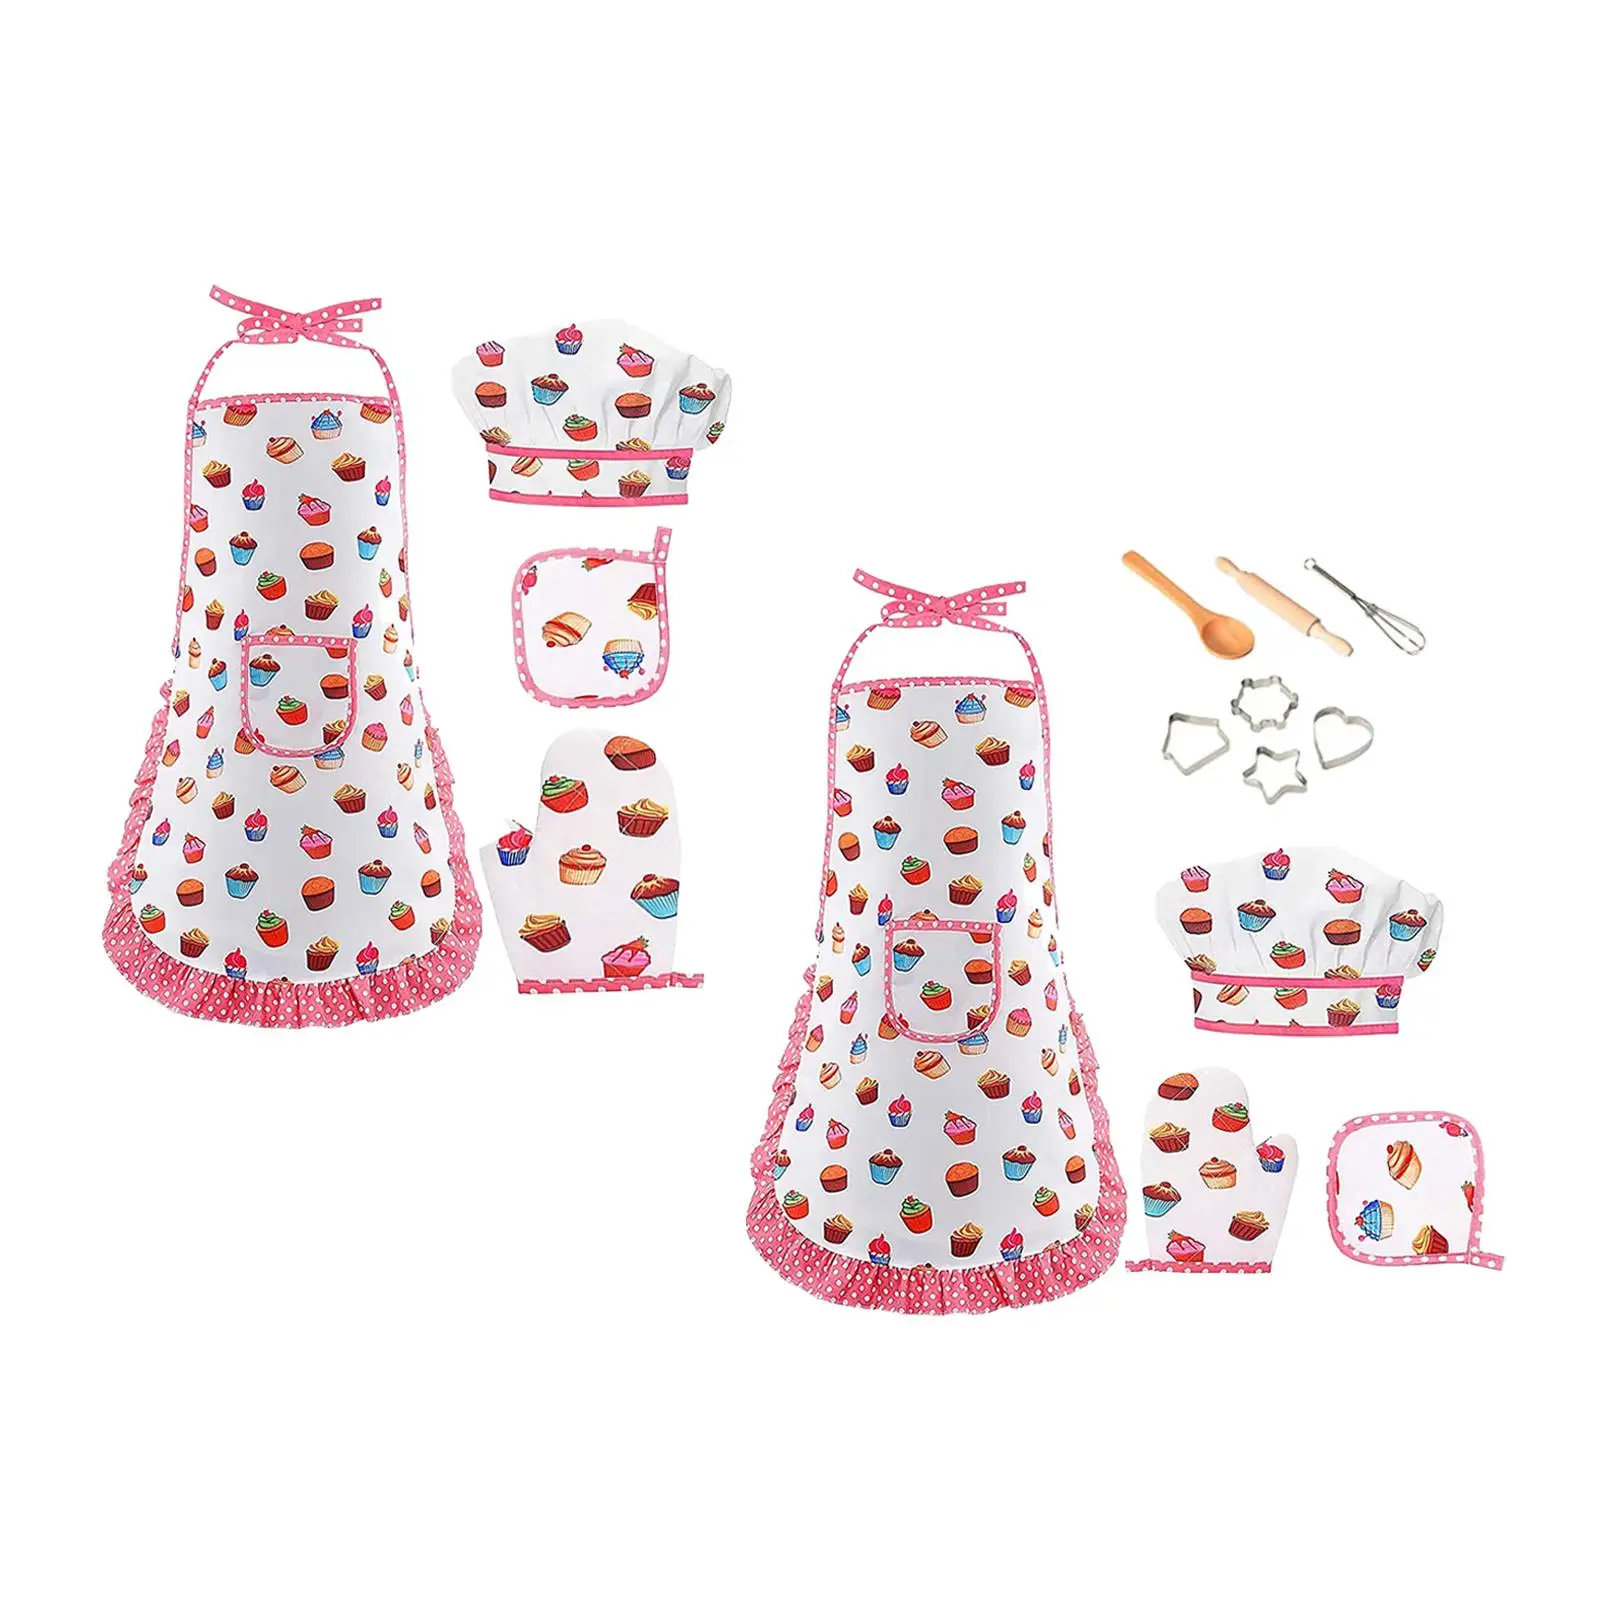 Simulation Kids Cooking Baking Set Role Play Cooking Gloves Chef Hat for Girls Kids